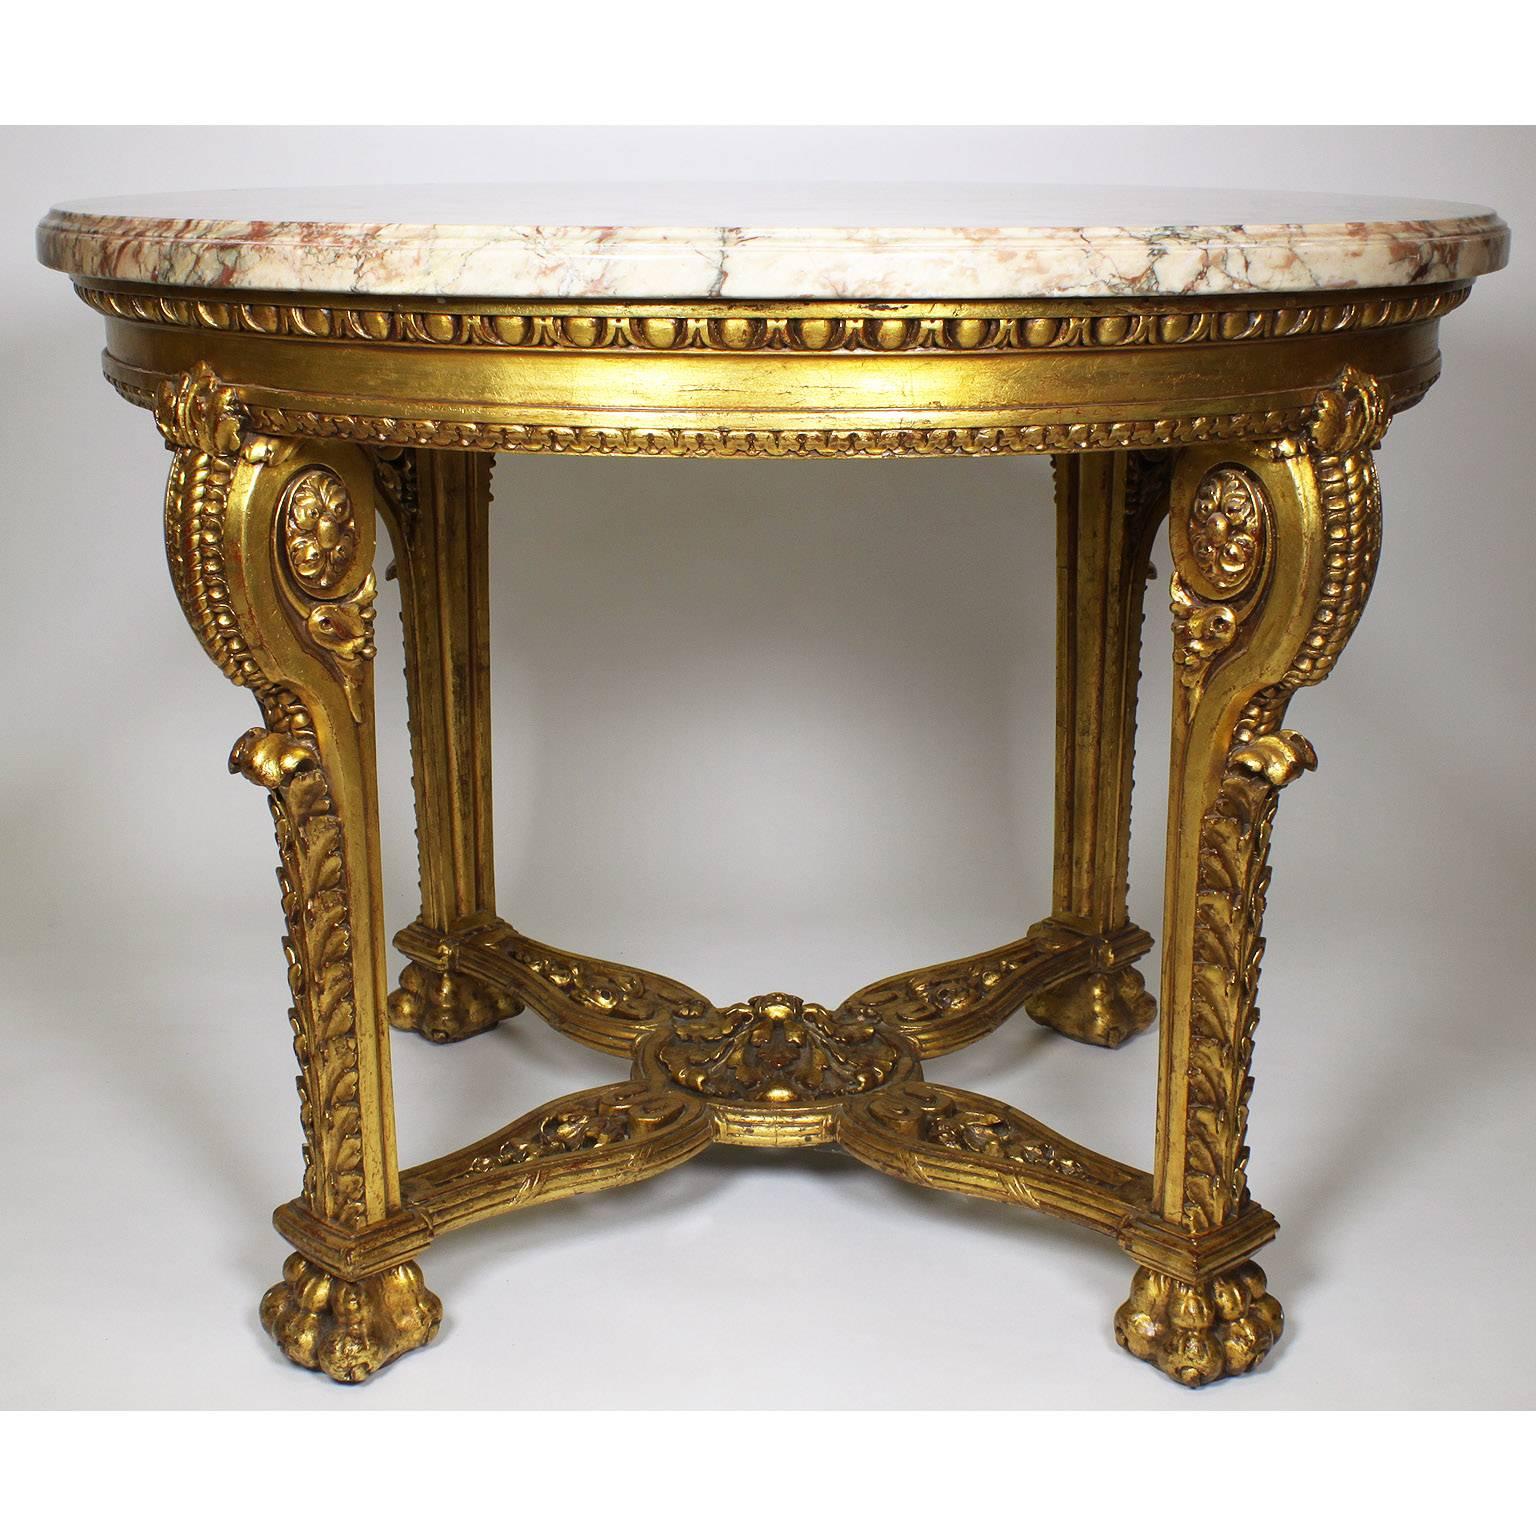 A French Baroque 19th-20th century Louis XV/XVI Transitional Style Gildwood Carved Circular Center Table with a Veined Peach Colored Brocatelle Marble Top, the four legs each with carvings of scrolls and acanthus ending on lion-claws, all joined by